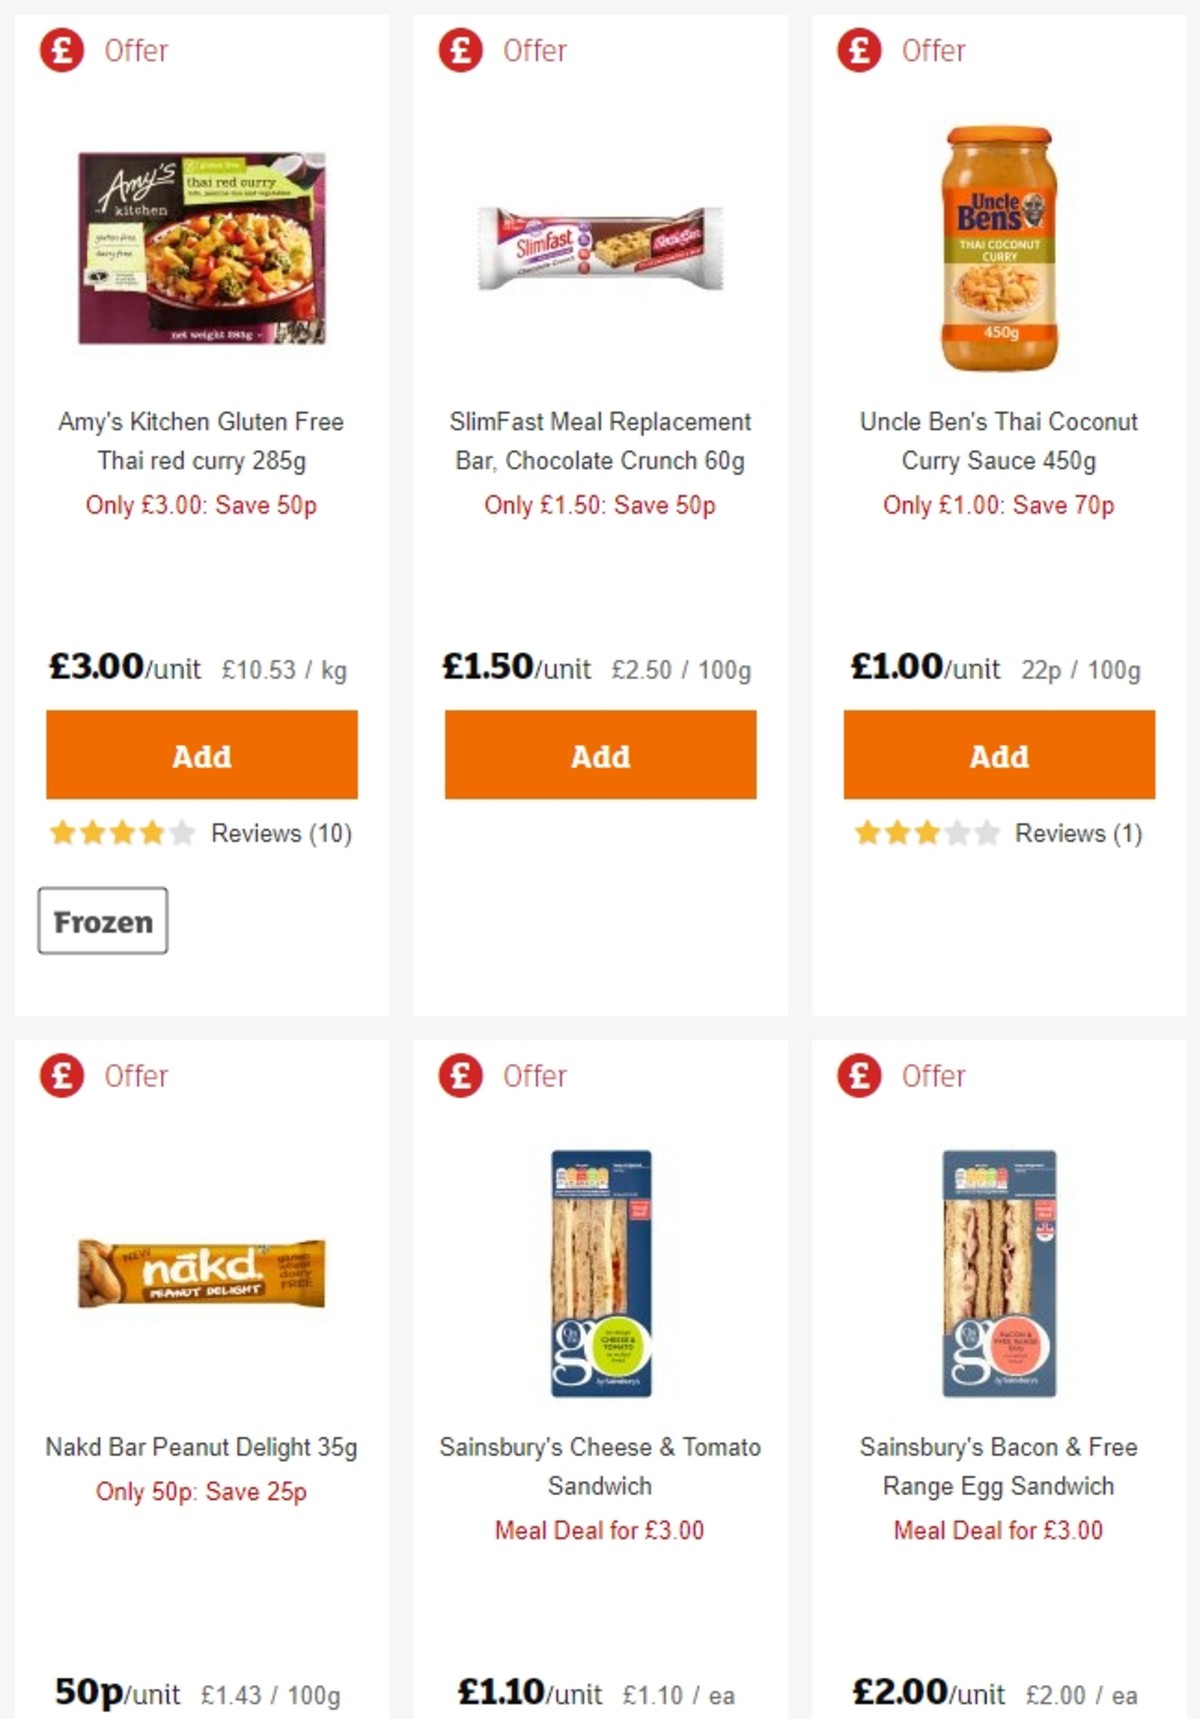 Sainsbury's Offers from 10 May